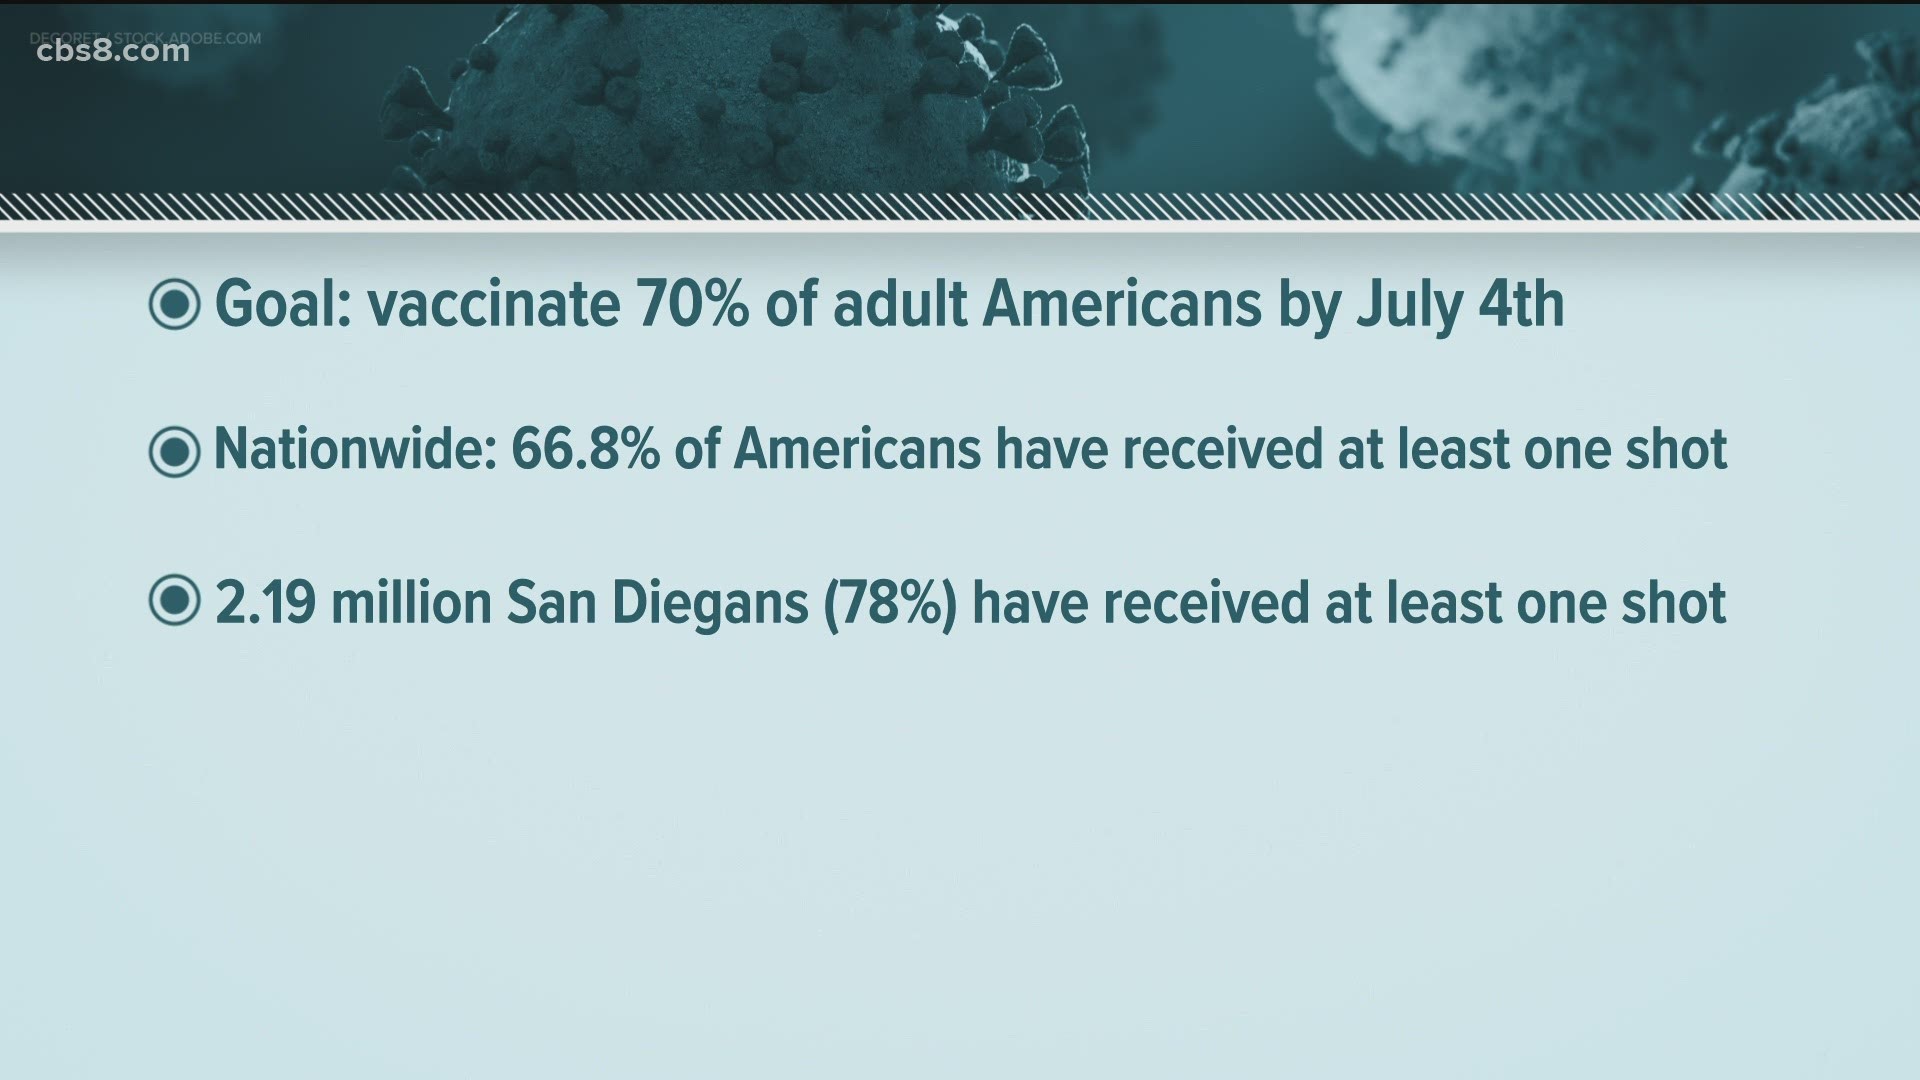 Now that the Fourth of July is here and while not every part of the country will reach President Biden's vaccine goal, San Diego County actually surpasses it.